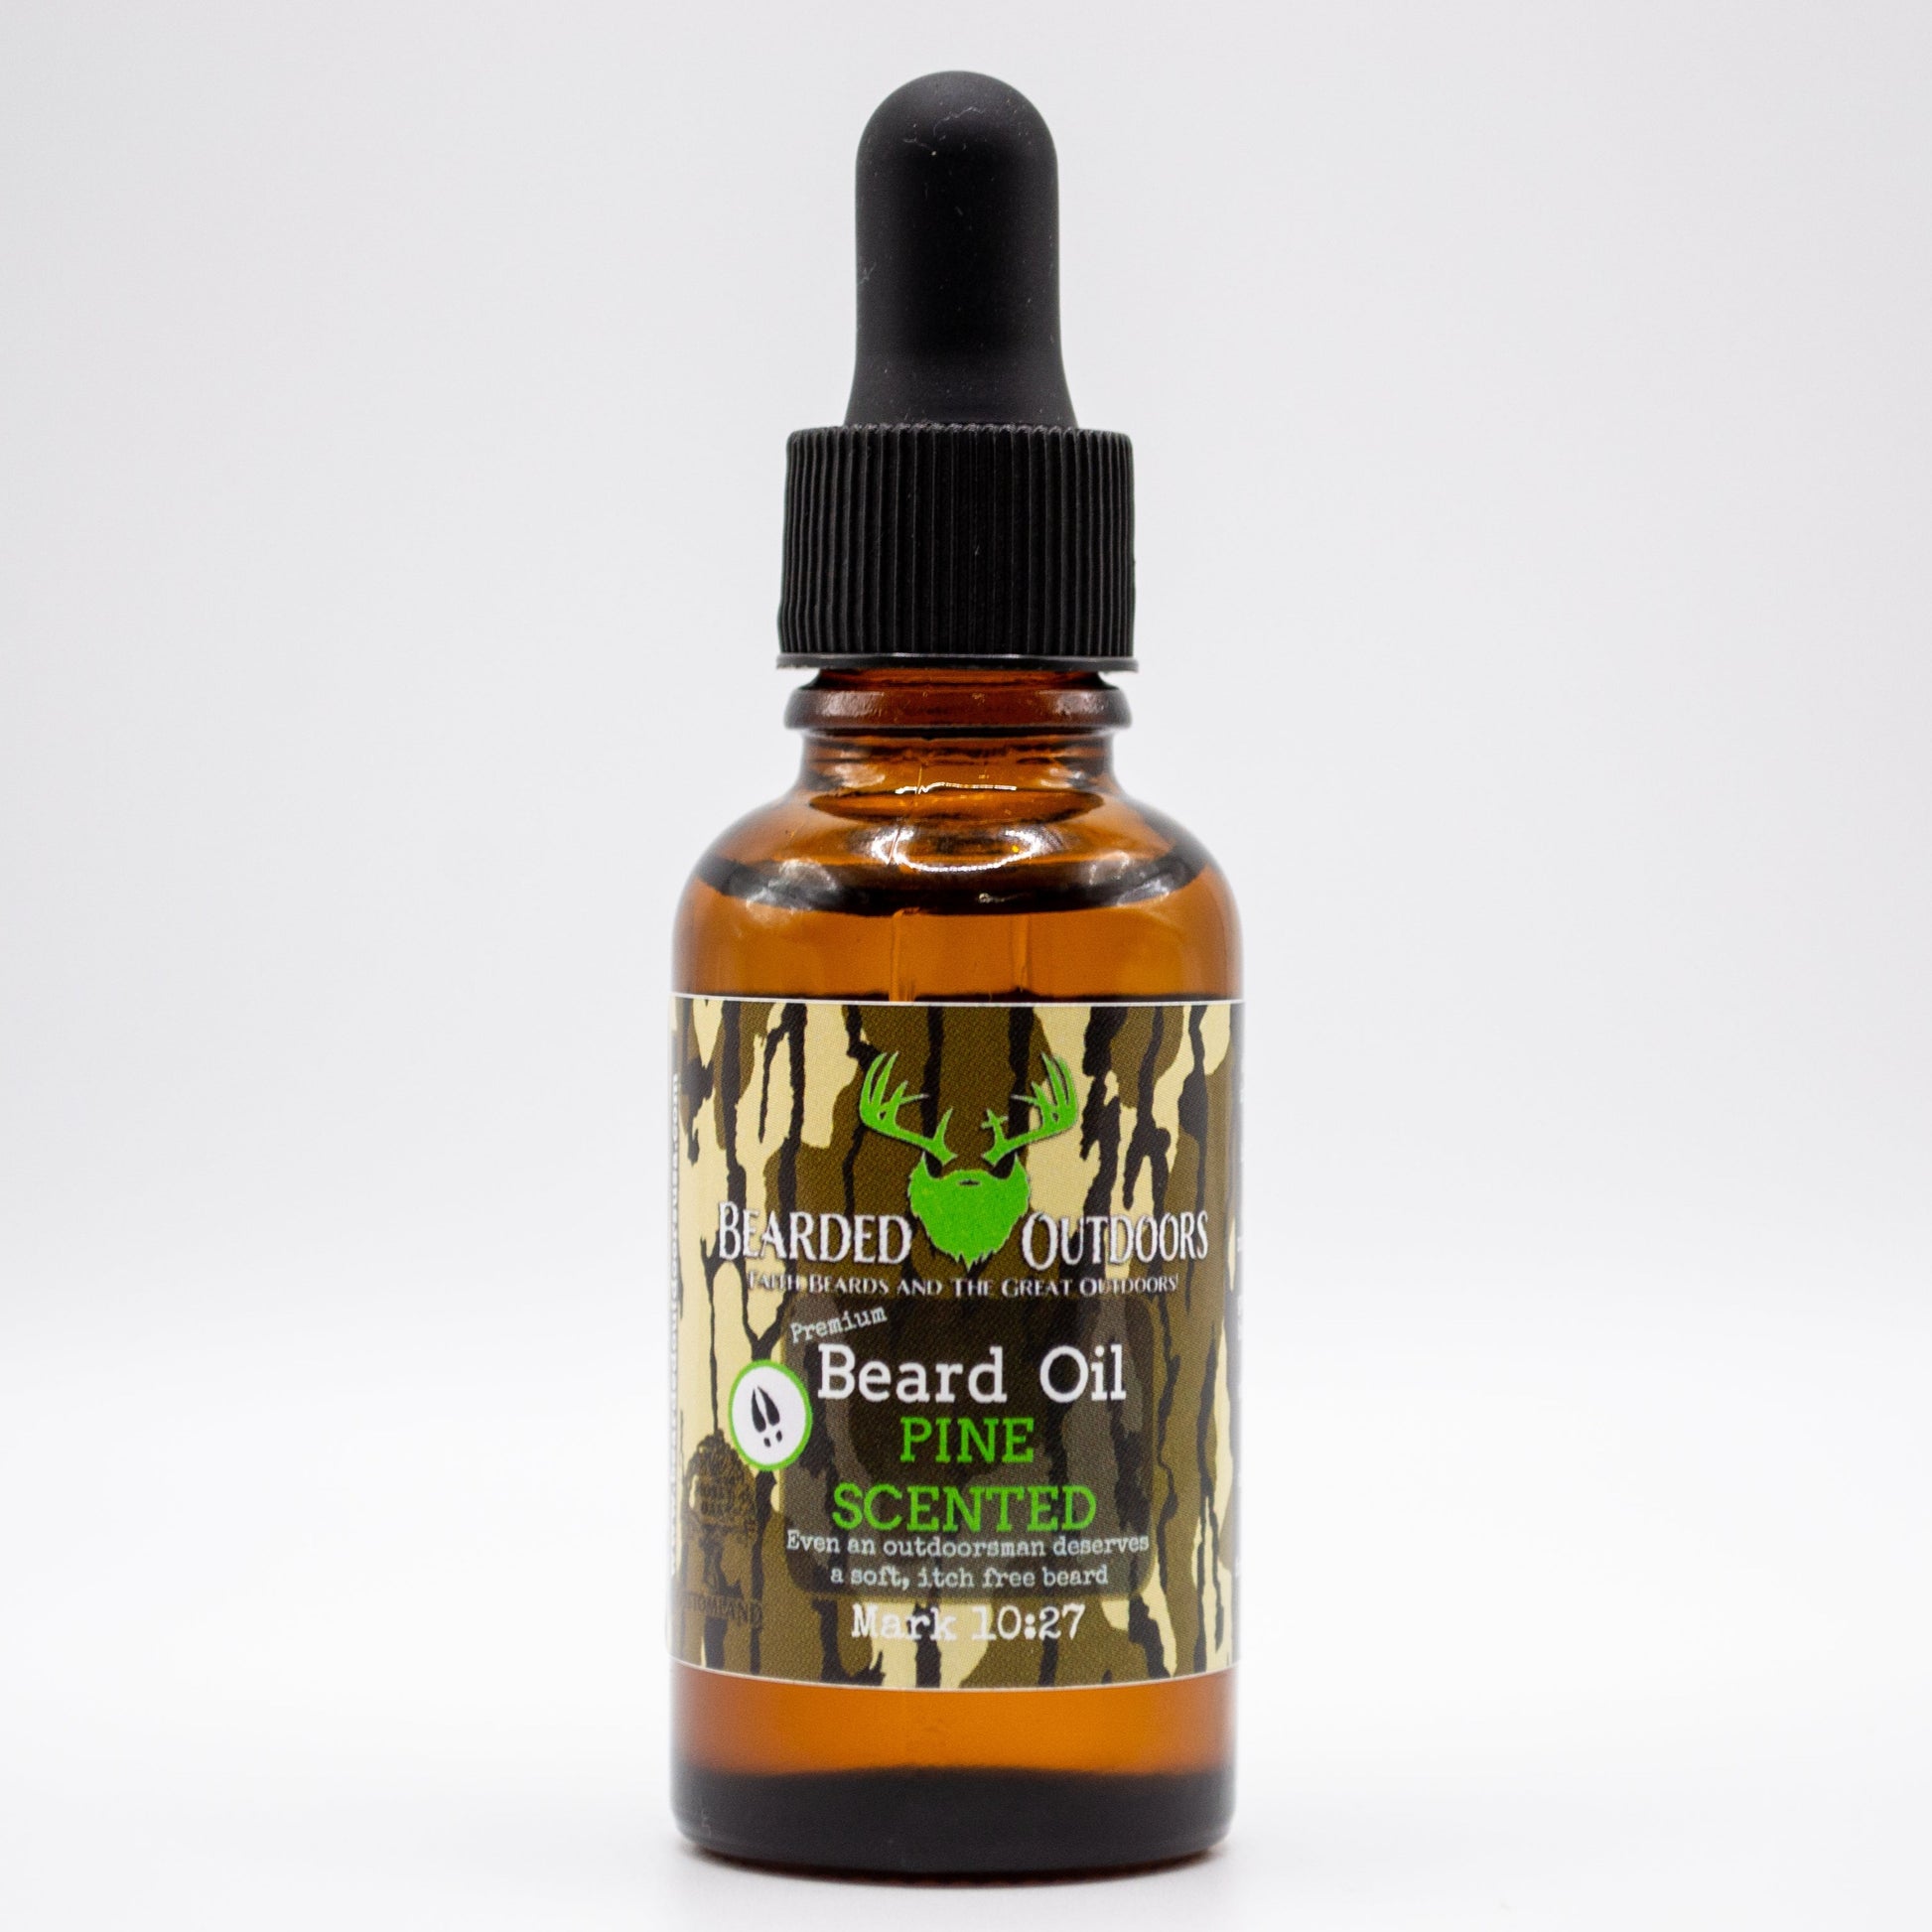 Mossy Oak Pine Scented Premium Beard Oil wrapped in Bottomland Camo by Bearded Outdoors